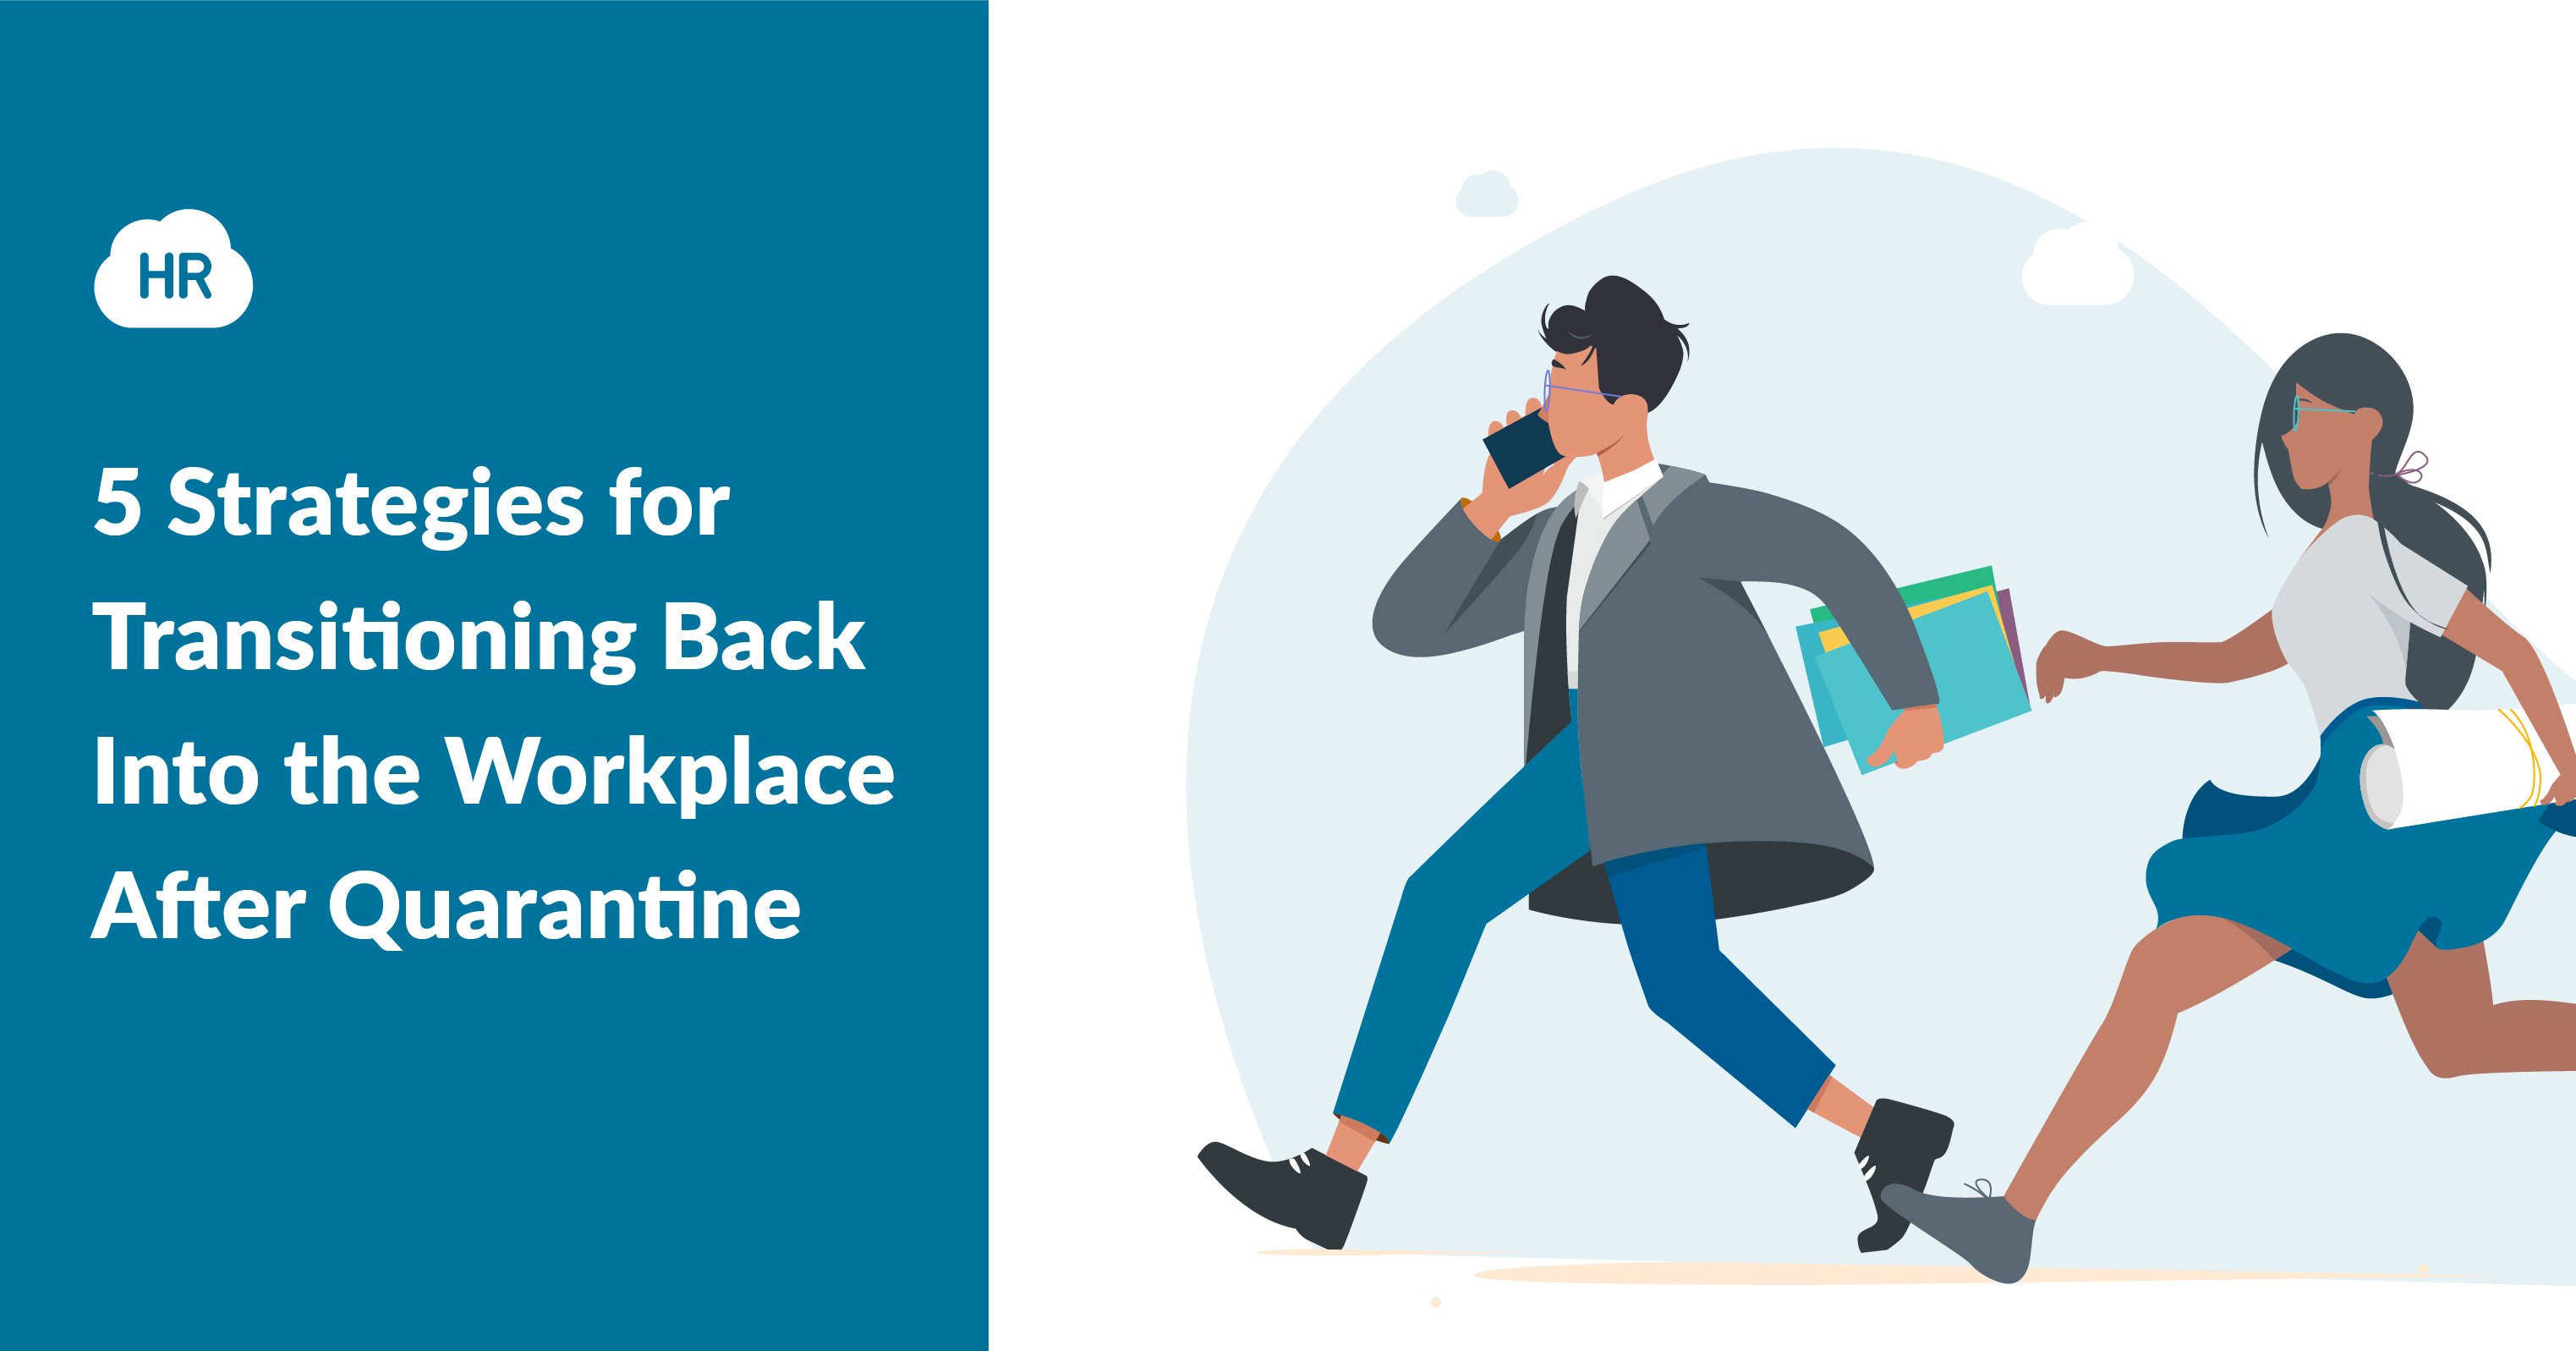 Five Strategies for Transitioning Back Into the Workplace After Quarantine